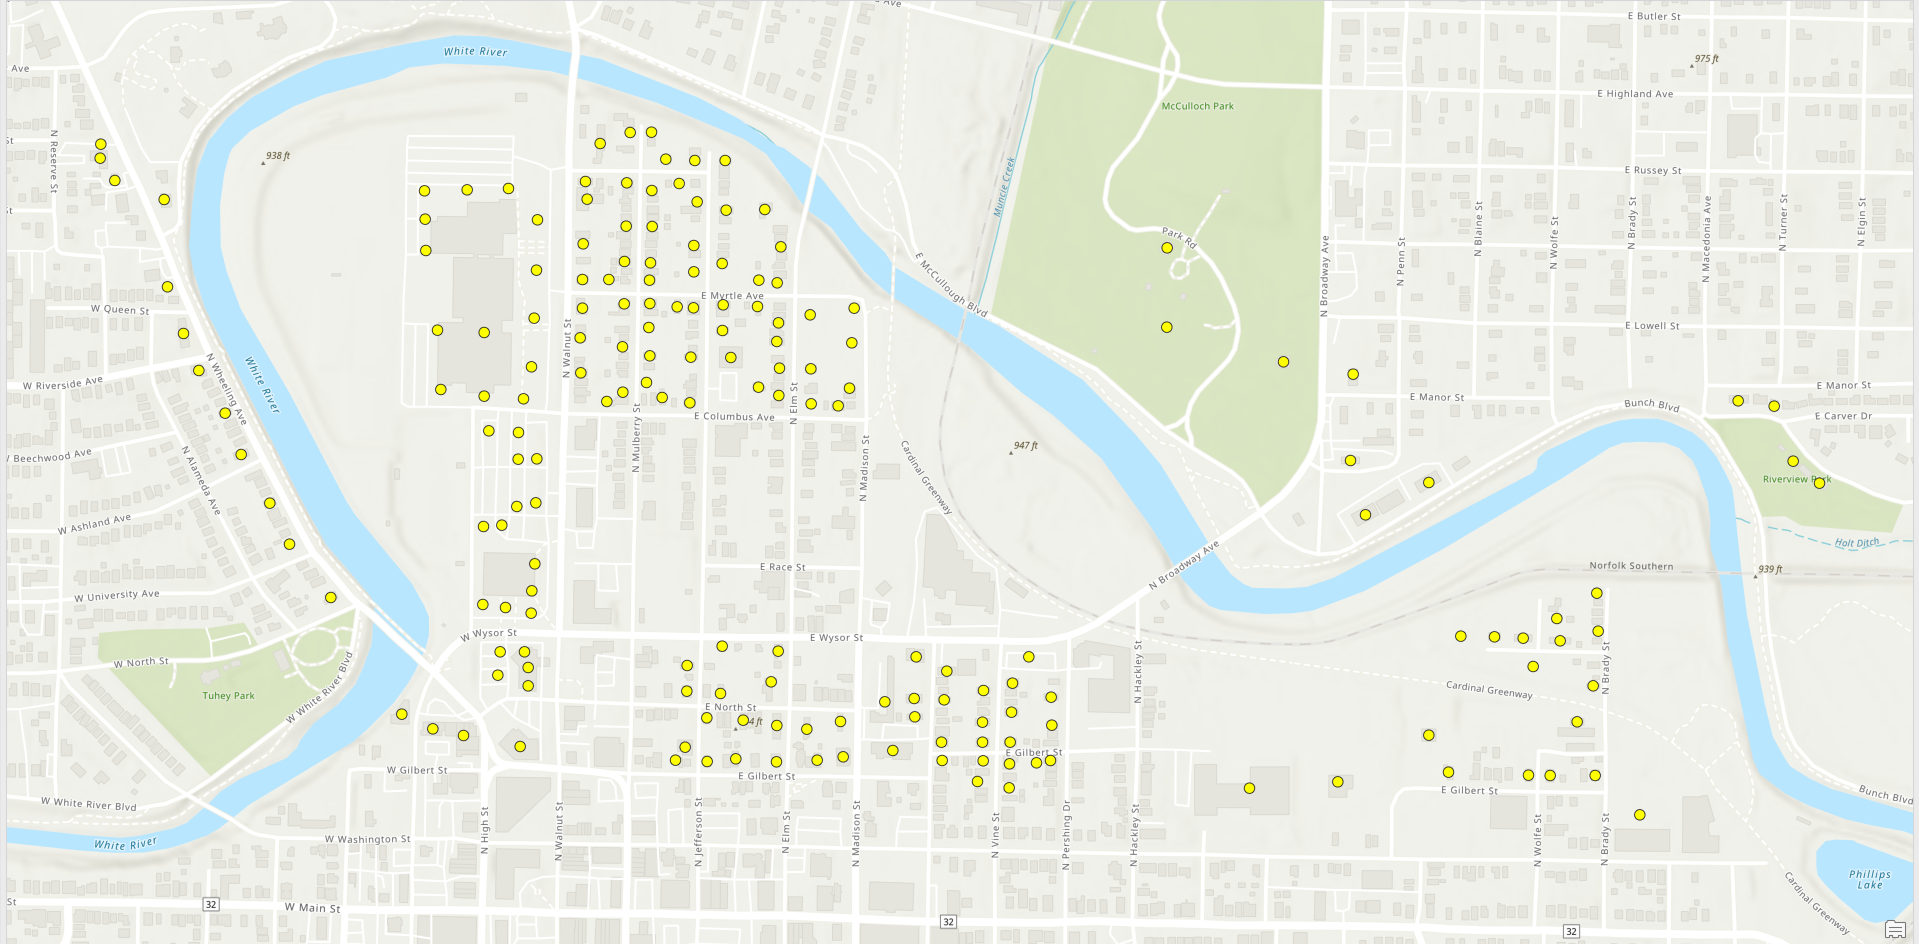 Structure point shapefile is displayed with yellow points overtop of a street view basemap